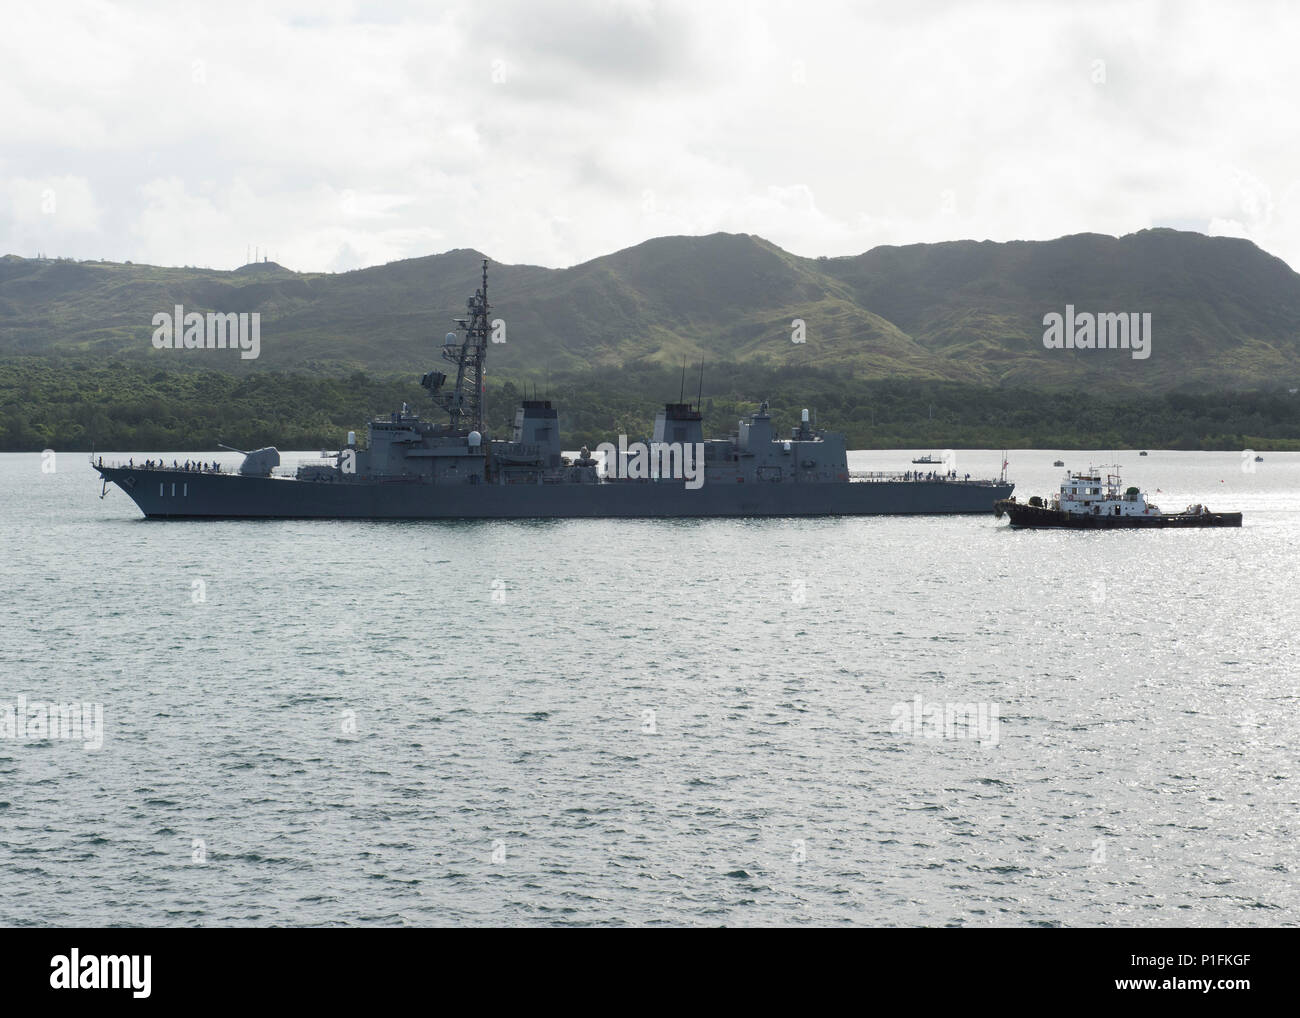 161101-N-ZK021-100 - GUAM (Nov. 1, 2016) The Japanese Ship (JS) Ohnami (DD 111) departs Apra Harbor to participate in Keen Sword 2017. Keen Sword 17 is a joint and bilateral field training exercise (FTX) between U.S. and Japanese forces meant to increase readiness and interoperability within the framework of the U.S. – Japan alliance. (U.S. Navy photo by Petty Officer First Class Nardel Gervacio/Released) Stock Photo